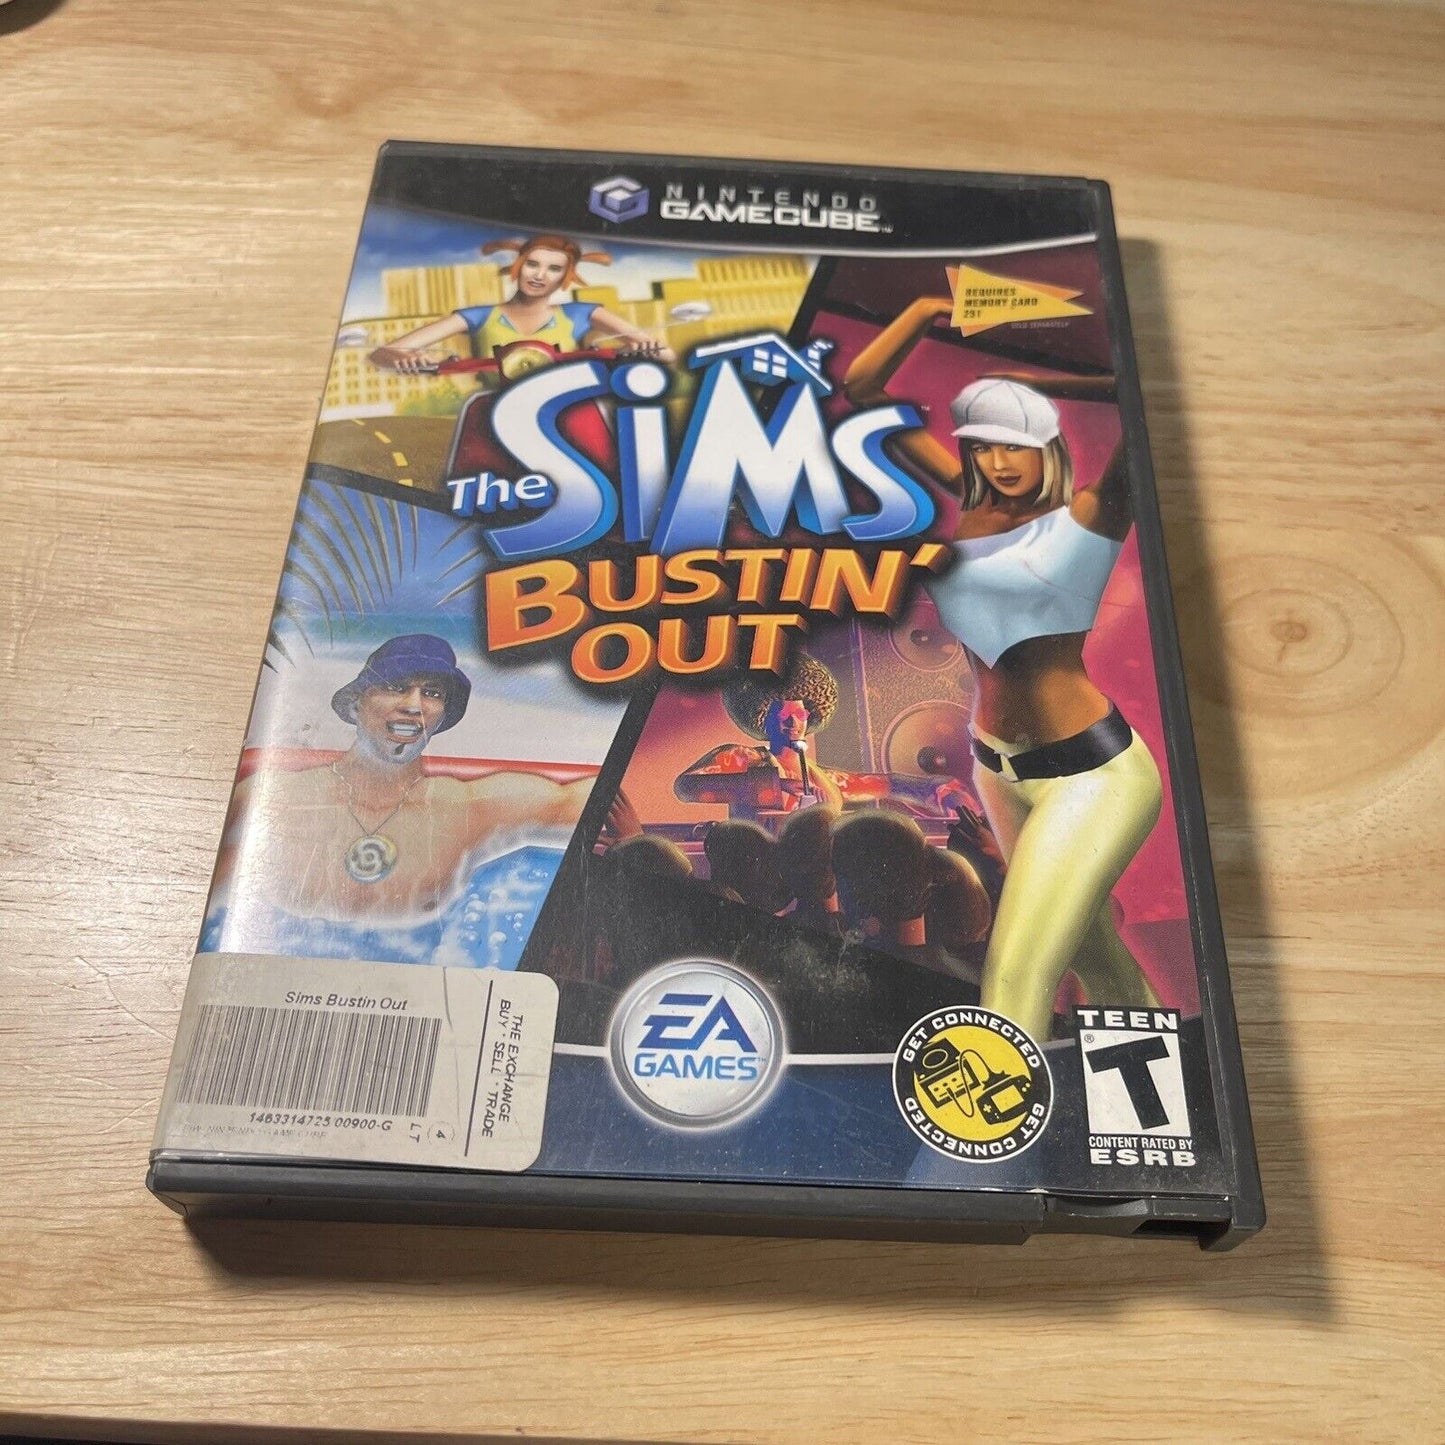 Sims Bustin' Out - Gamecube